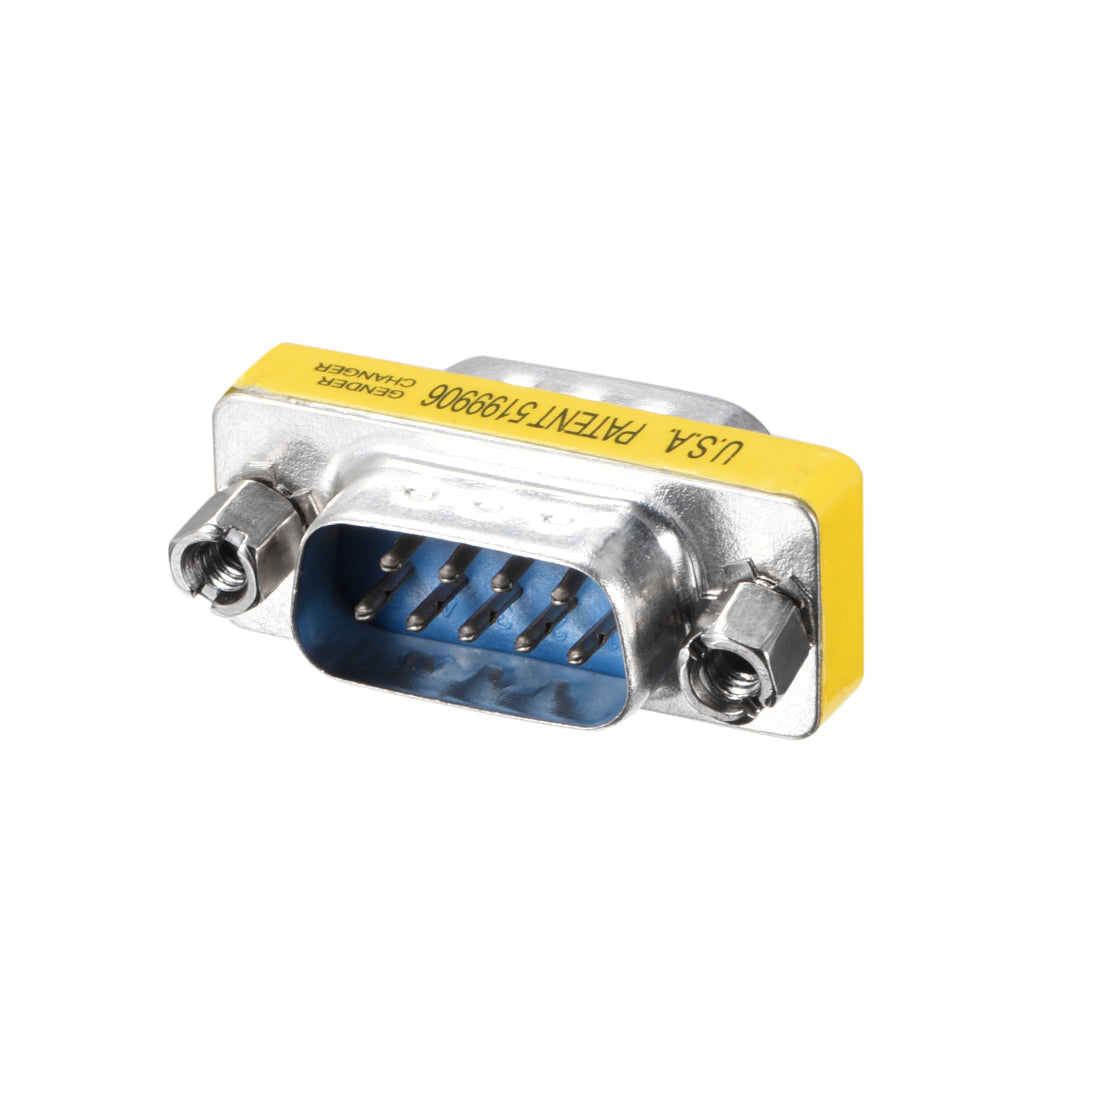 uxcell Uxcell DB9 VGA Gender Changer 9 Pin Male to Male 2-row Mini Gender Changer Coupler Adapter Connector for Serial Applications Blue 5pcs